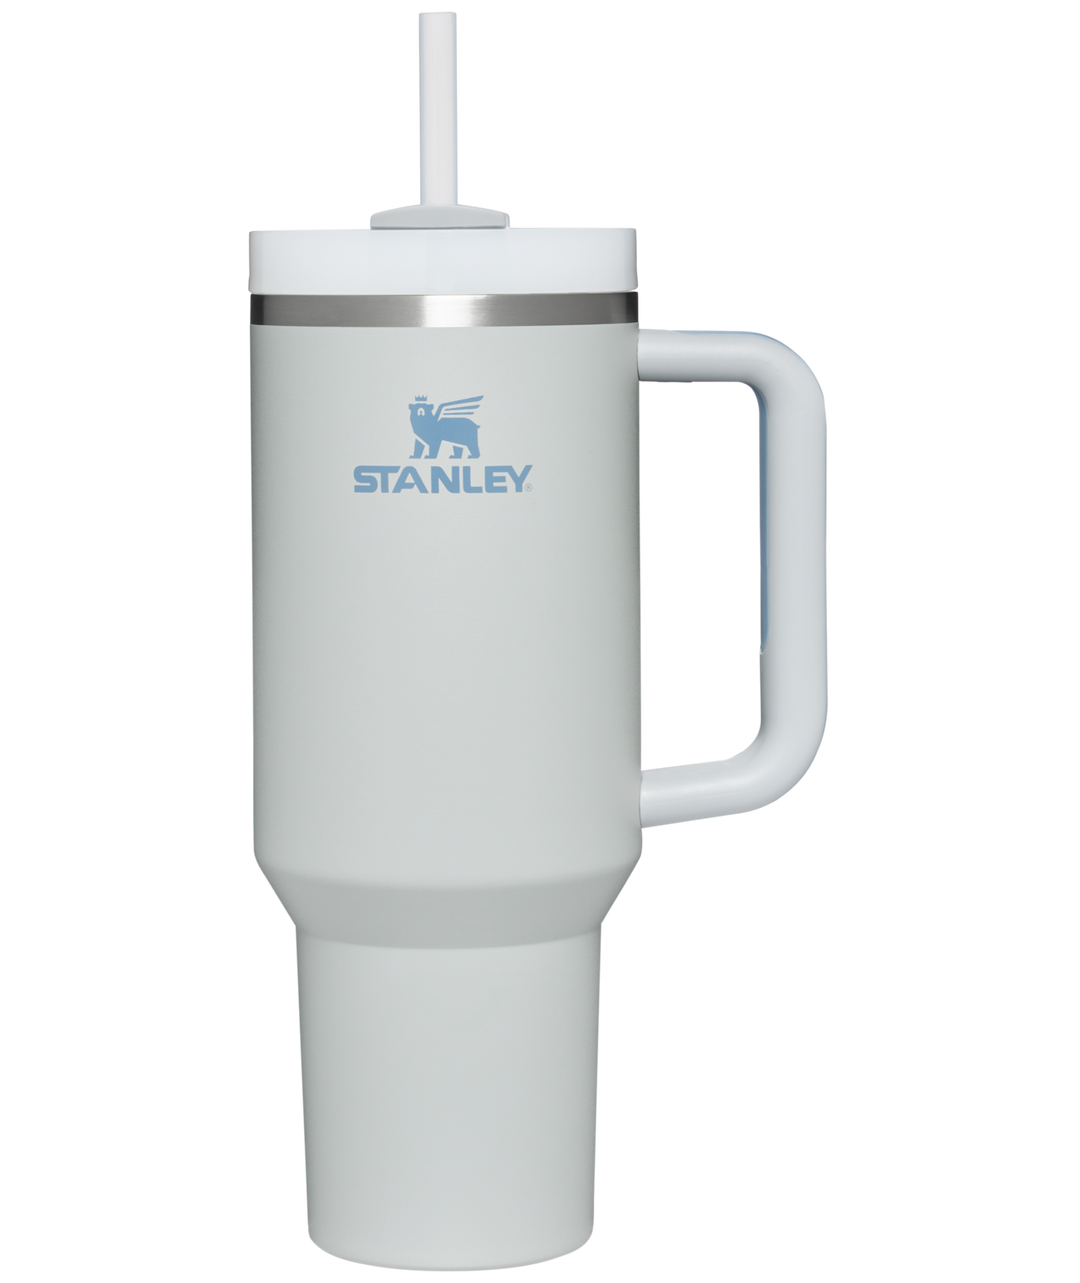 New Stanley Color JUST Launched  Flowstate 40 Oz in Pink Parade ::  Southern Savers